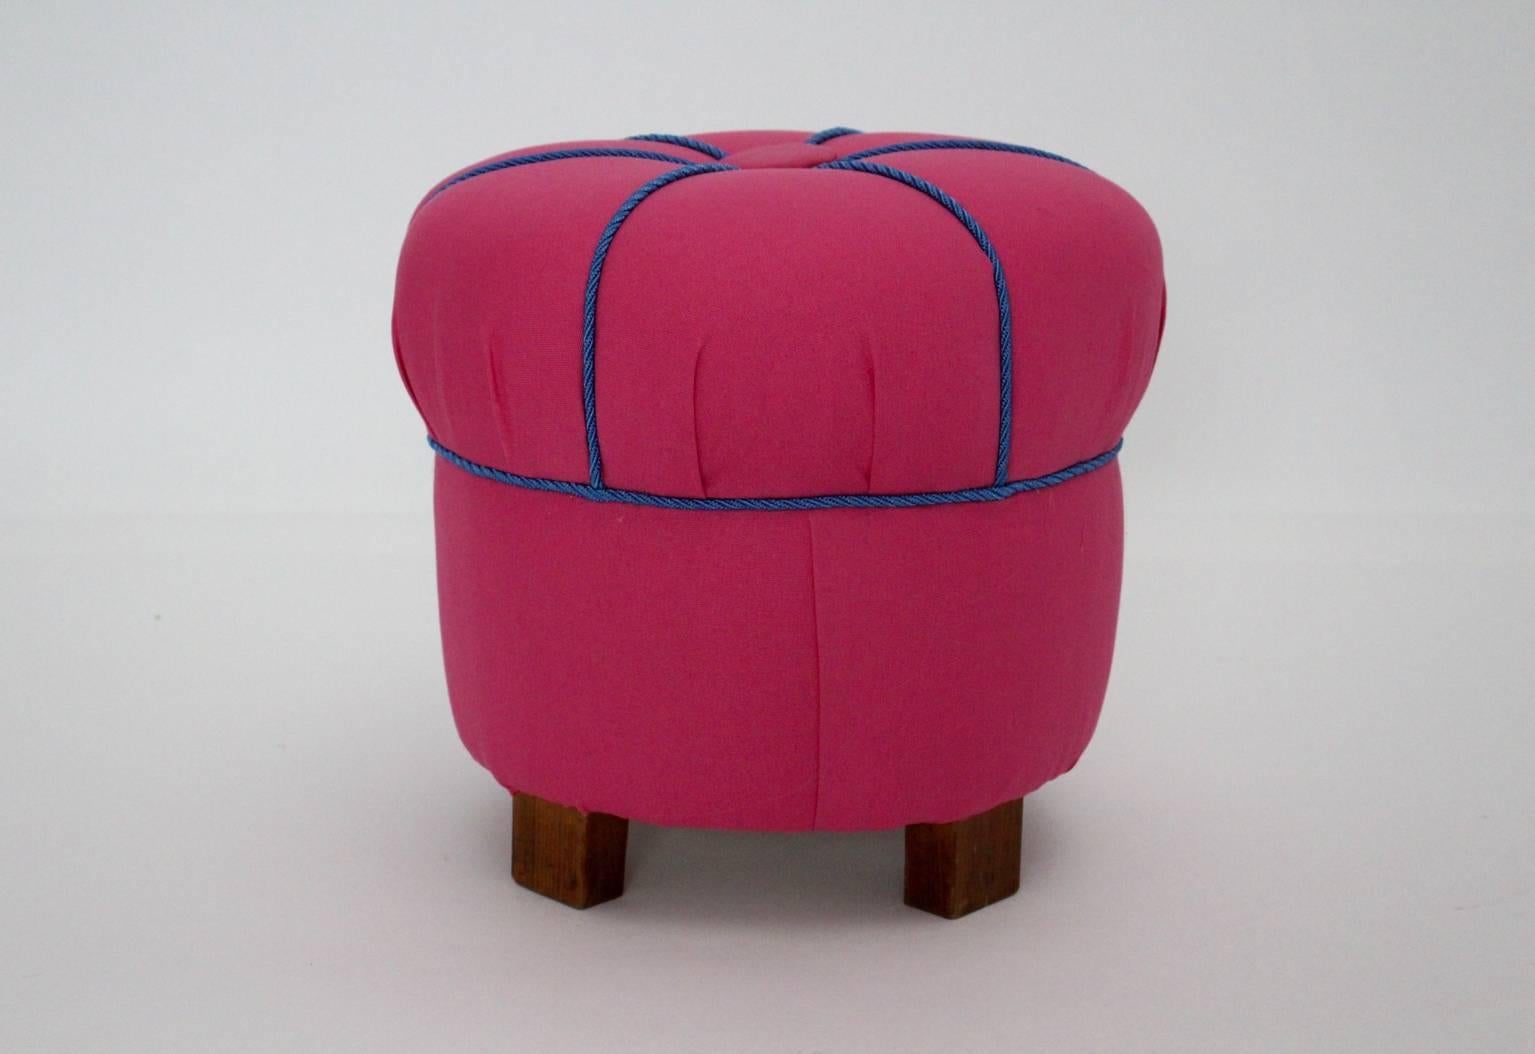 A charming art deco pink textile pouf / stool or tabouret,  Austria, 1930s.
The stool is newly covered with a high quality pink fabric and decorated with blue cords.
The stool has beechwood feet.

The condition is very good.
 All measures are